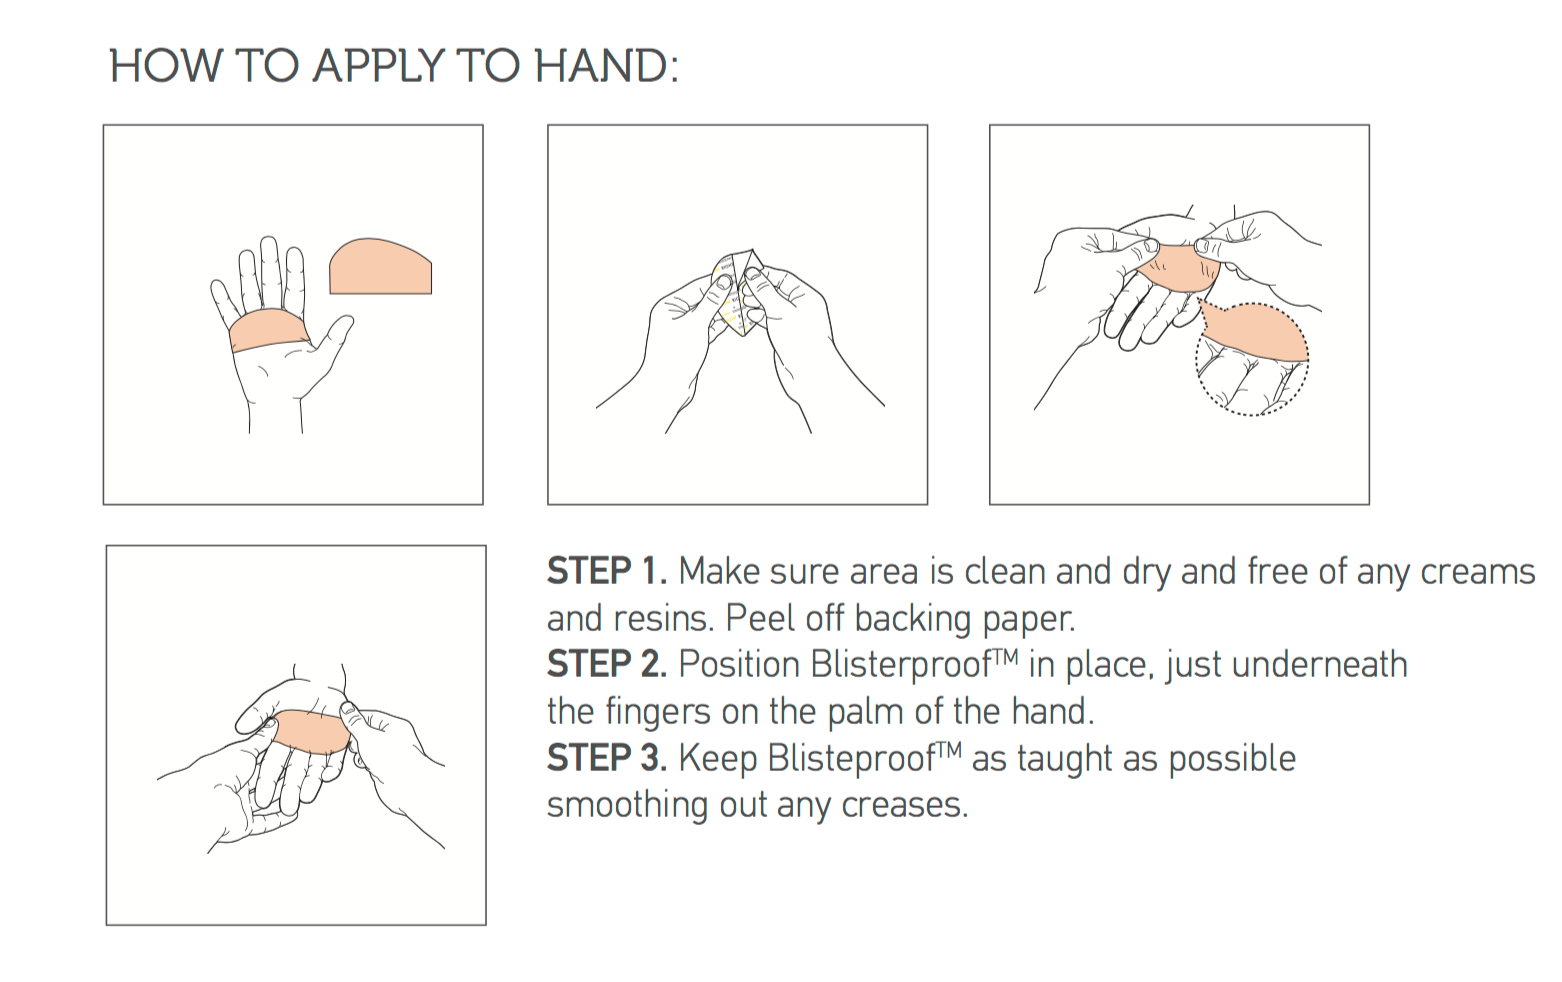 Blisterproof instructions rowing blister prevention